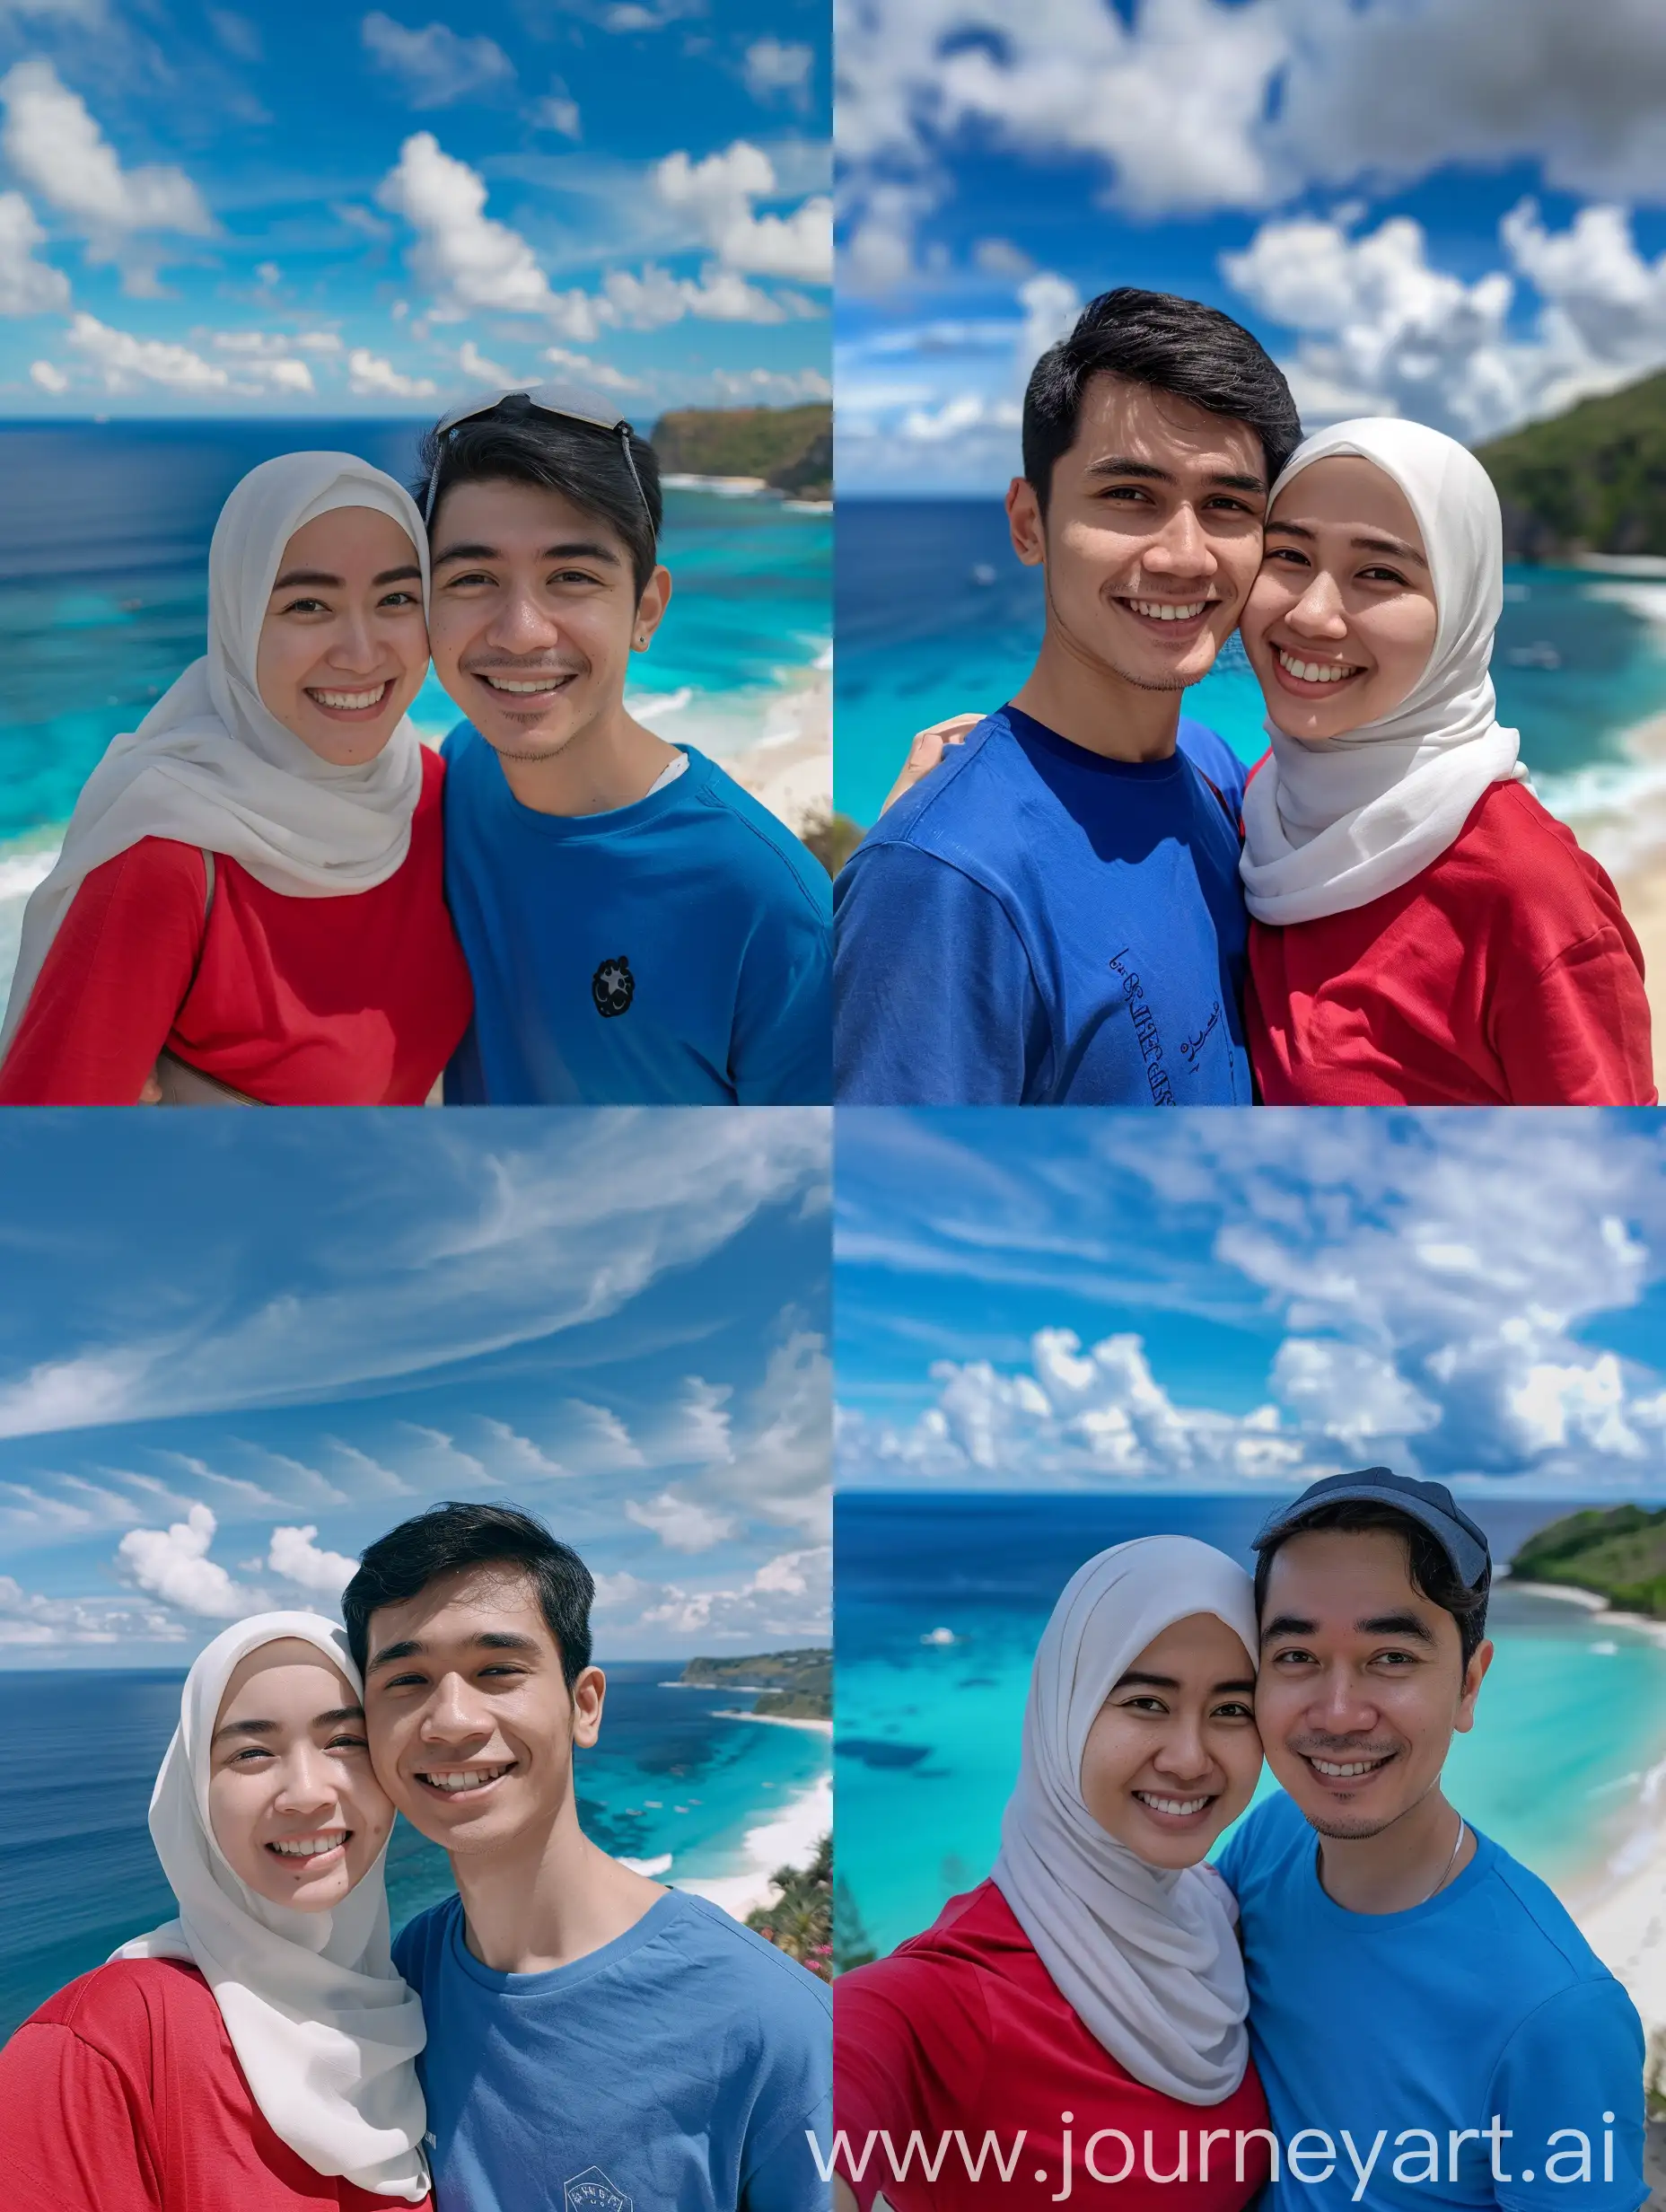 (8K, RAW Photo, Photography, Photorealistic, Realistic, Highest Quality, Intricate Detail), Medium photo of a 25 year old Indonesian woman wearing a white hijab, wearing a red t-shirt, they are smiling facing the camera, their eyes are looking at the camera, the corners of their eyes are parallel and they are hugging someone 25 year old Indonesian guy, short black hair, dressed in a blue t-shirt, they smile facing the camera, his eyes look at the camera, the corners of his eyes are parallel to the view on the beautiful beach in the afternoon, the blue sea, beautiful clouds